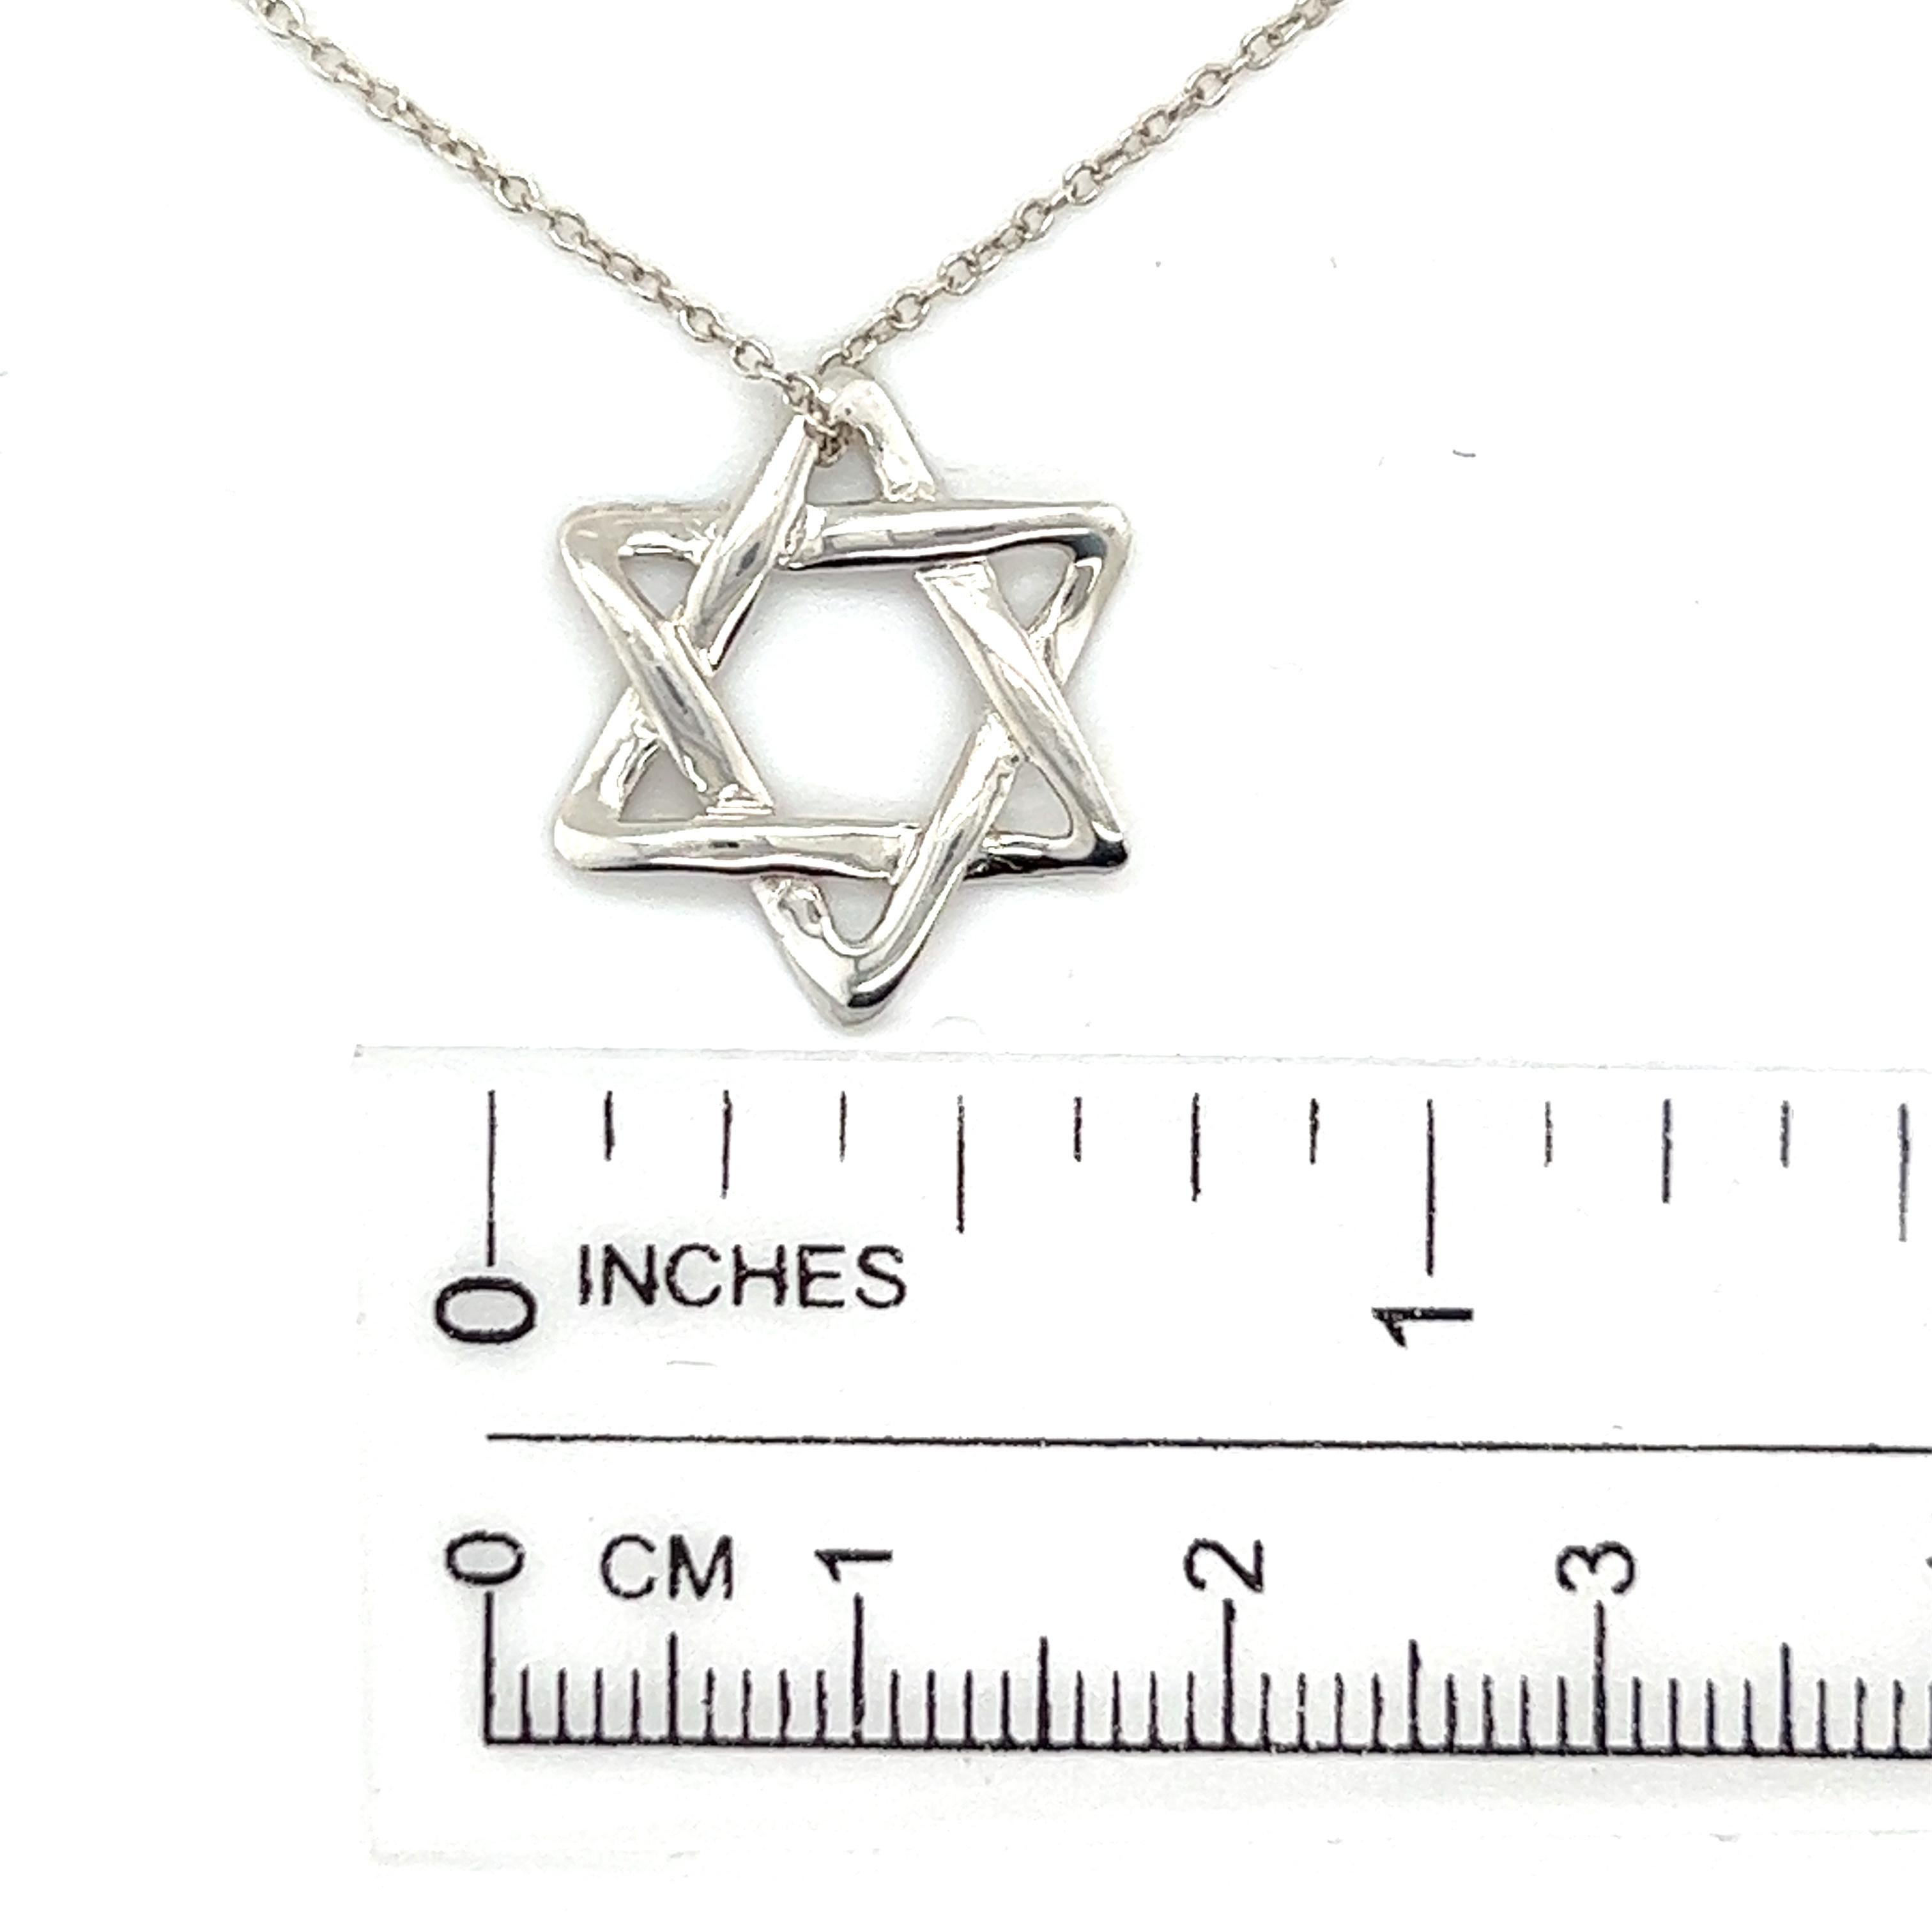 Sold at Auction: T&CO. STERLING STAR OF DAVID NECKLACE,15.5IN